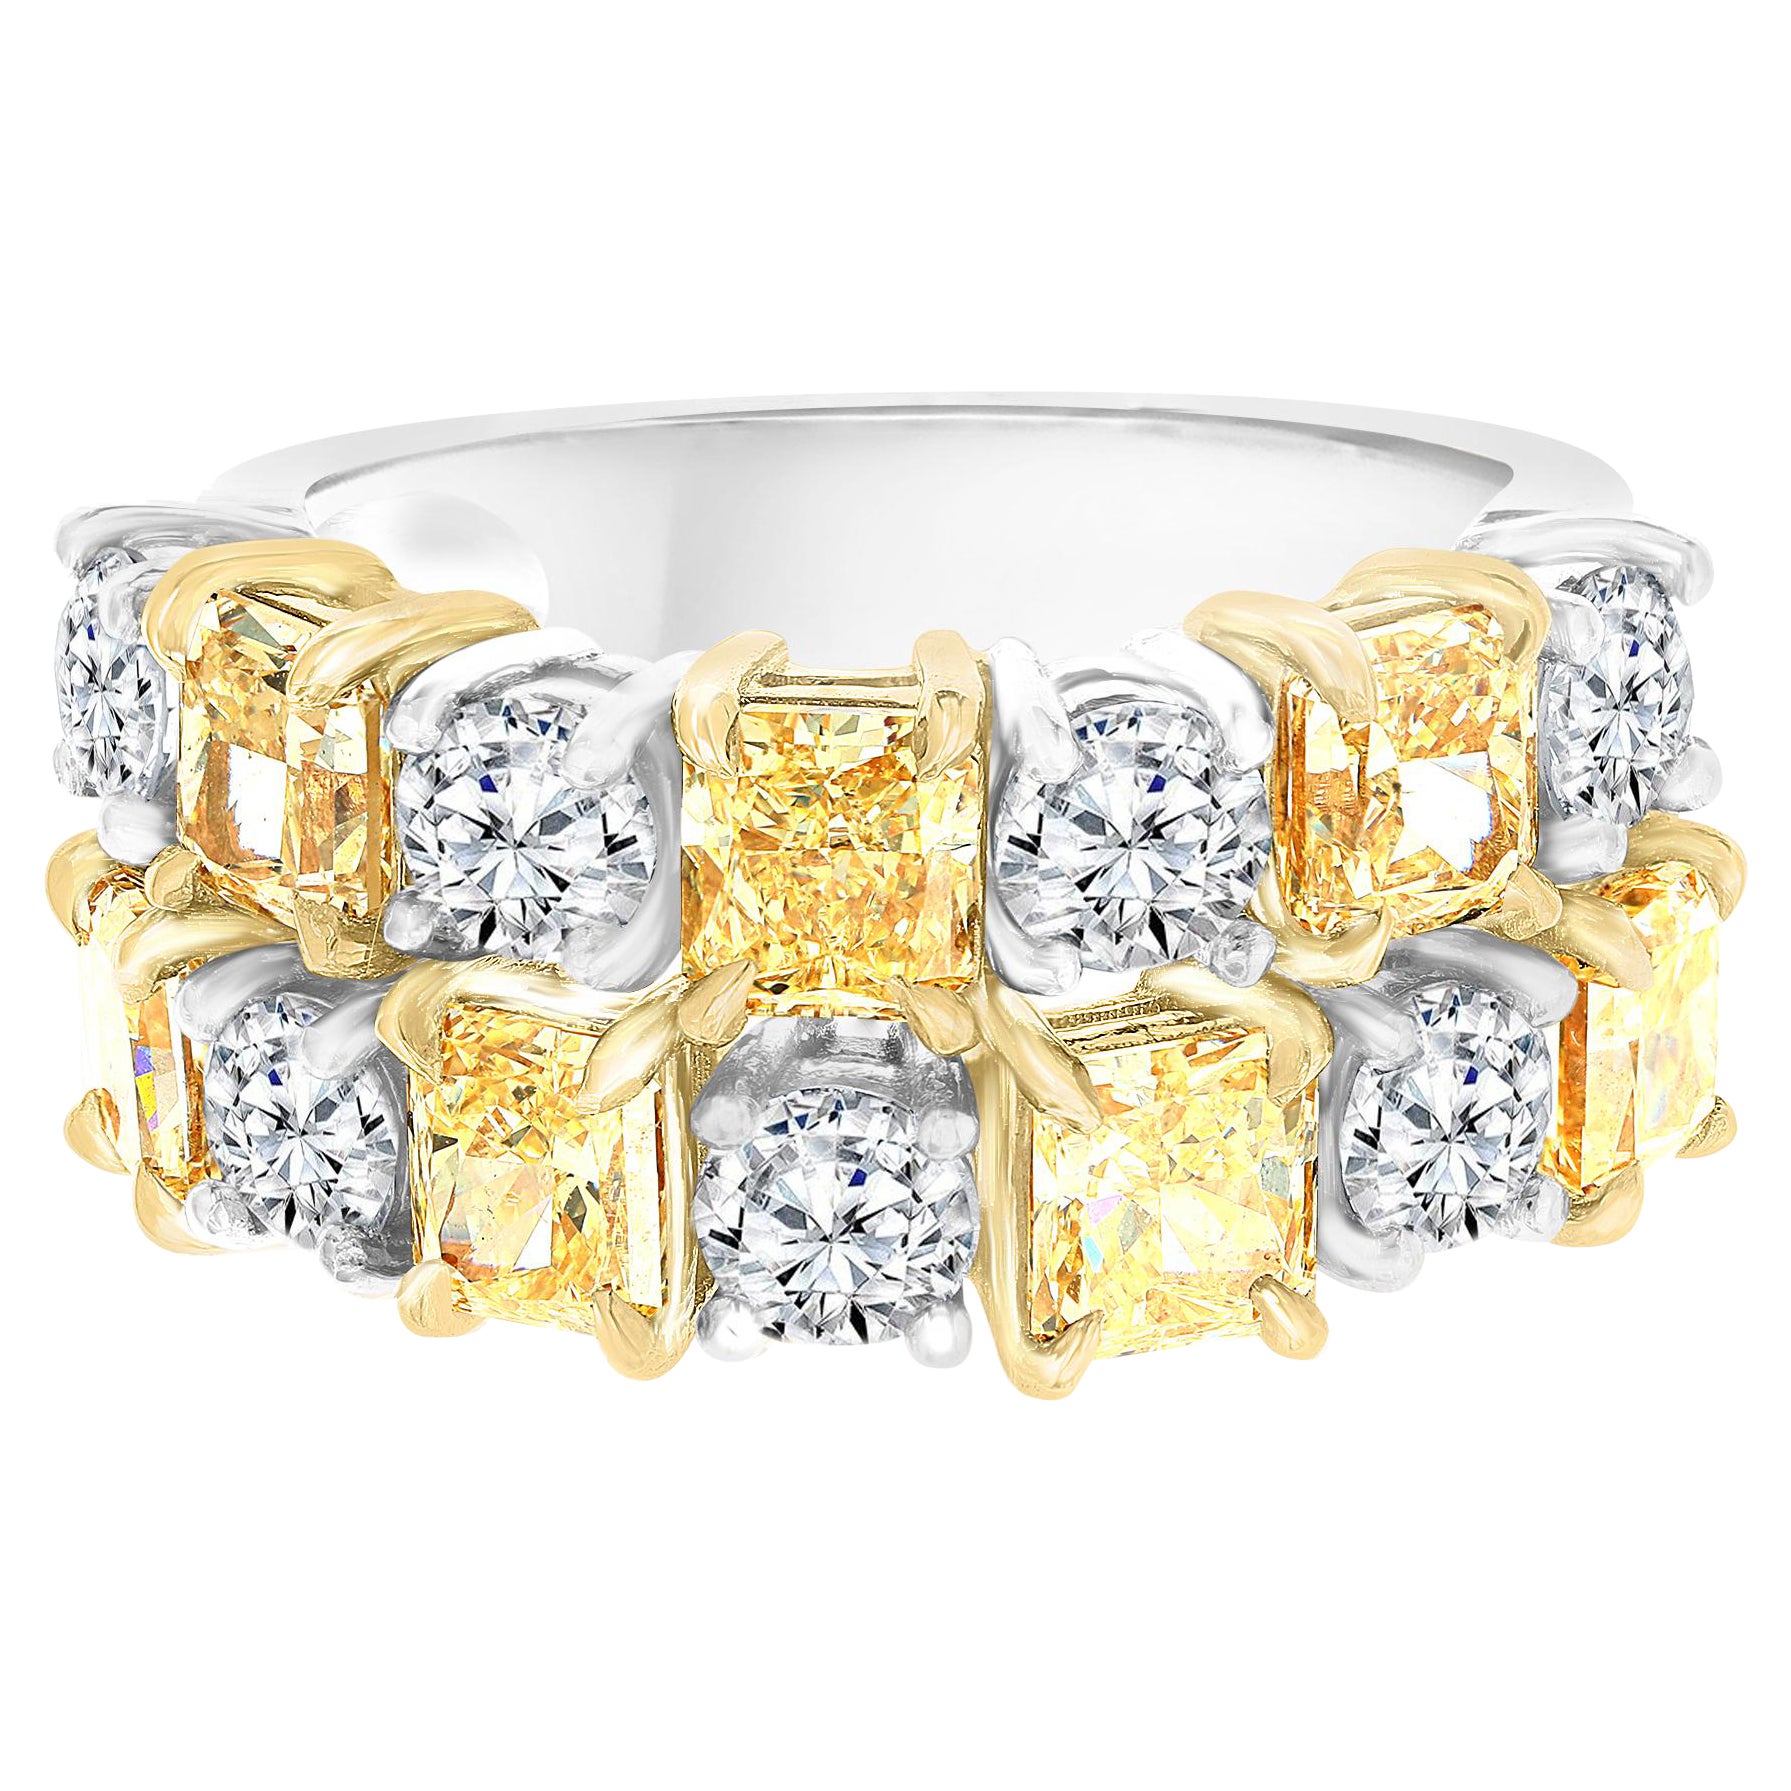 Auction - 5.25 Carat Fancy Yellow Radiant Cut and White Diamond Band Ring For Sale